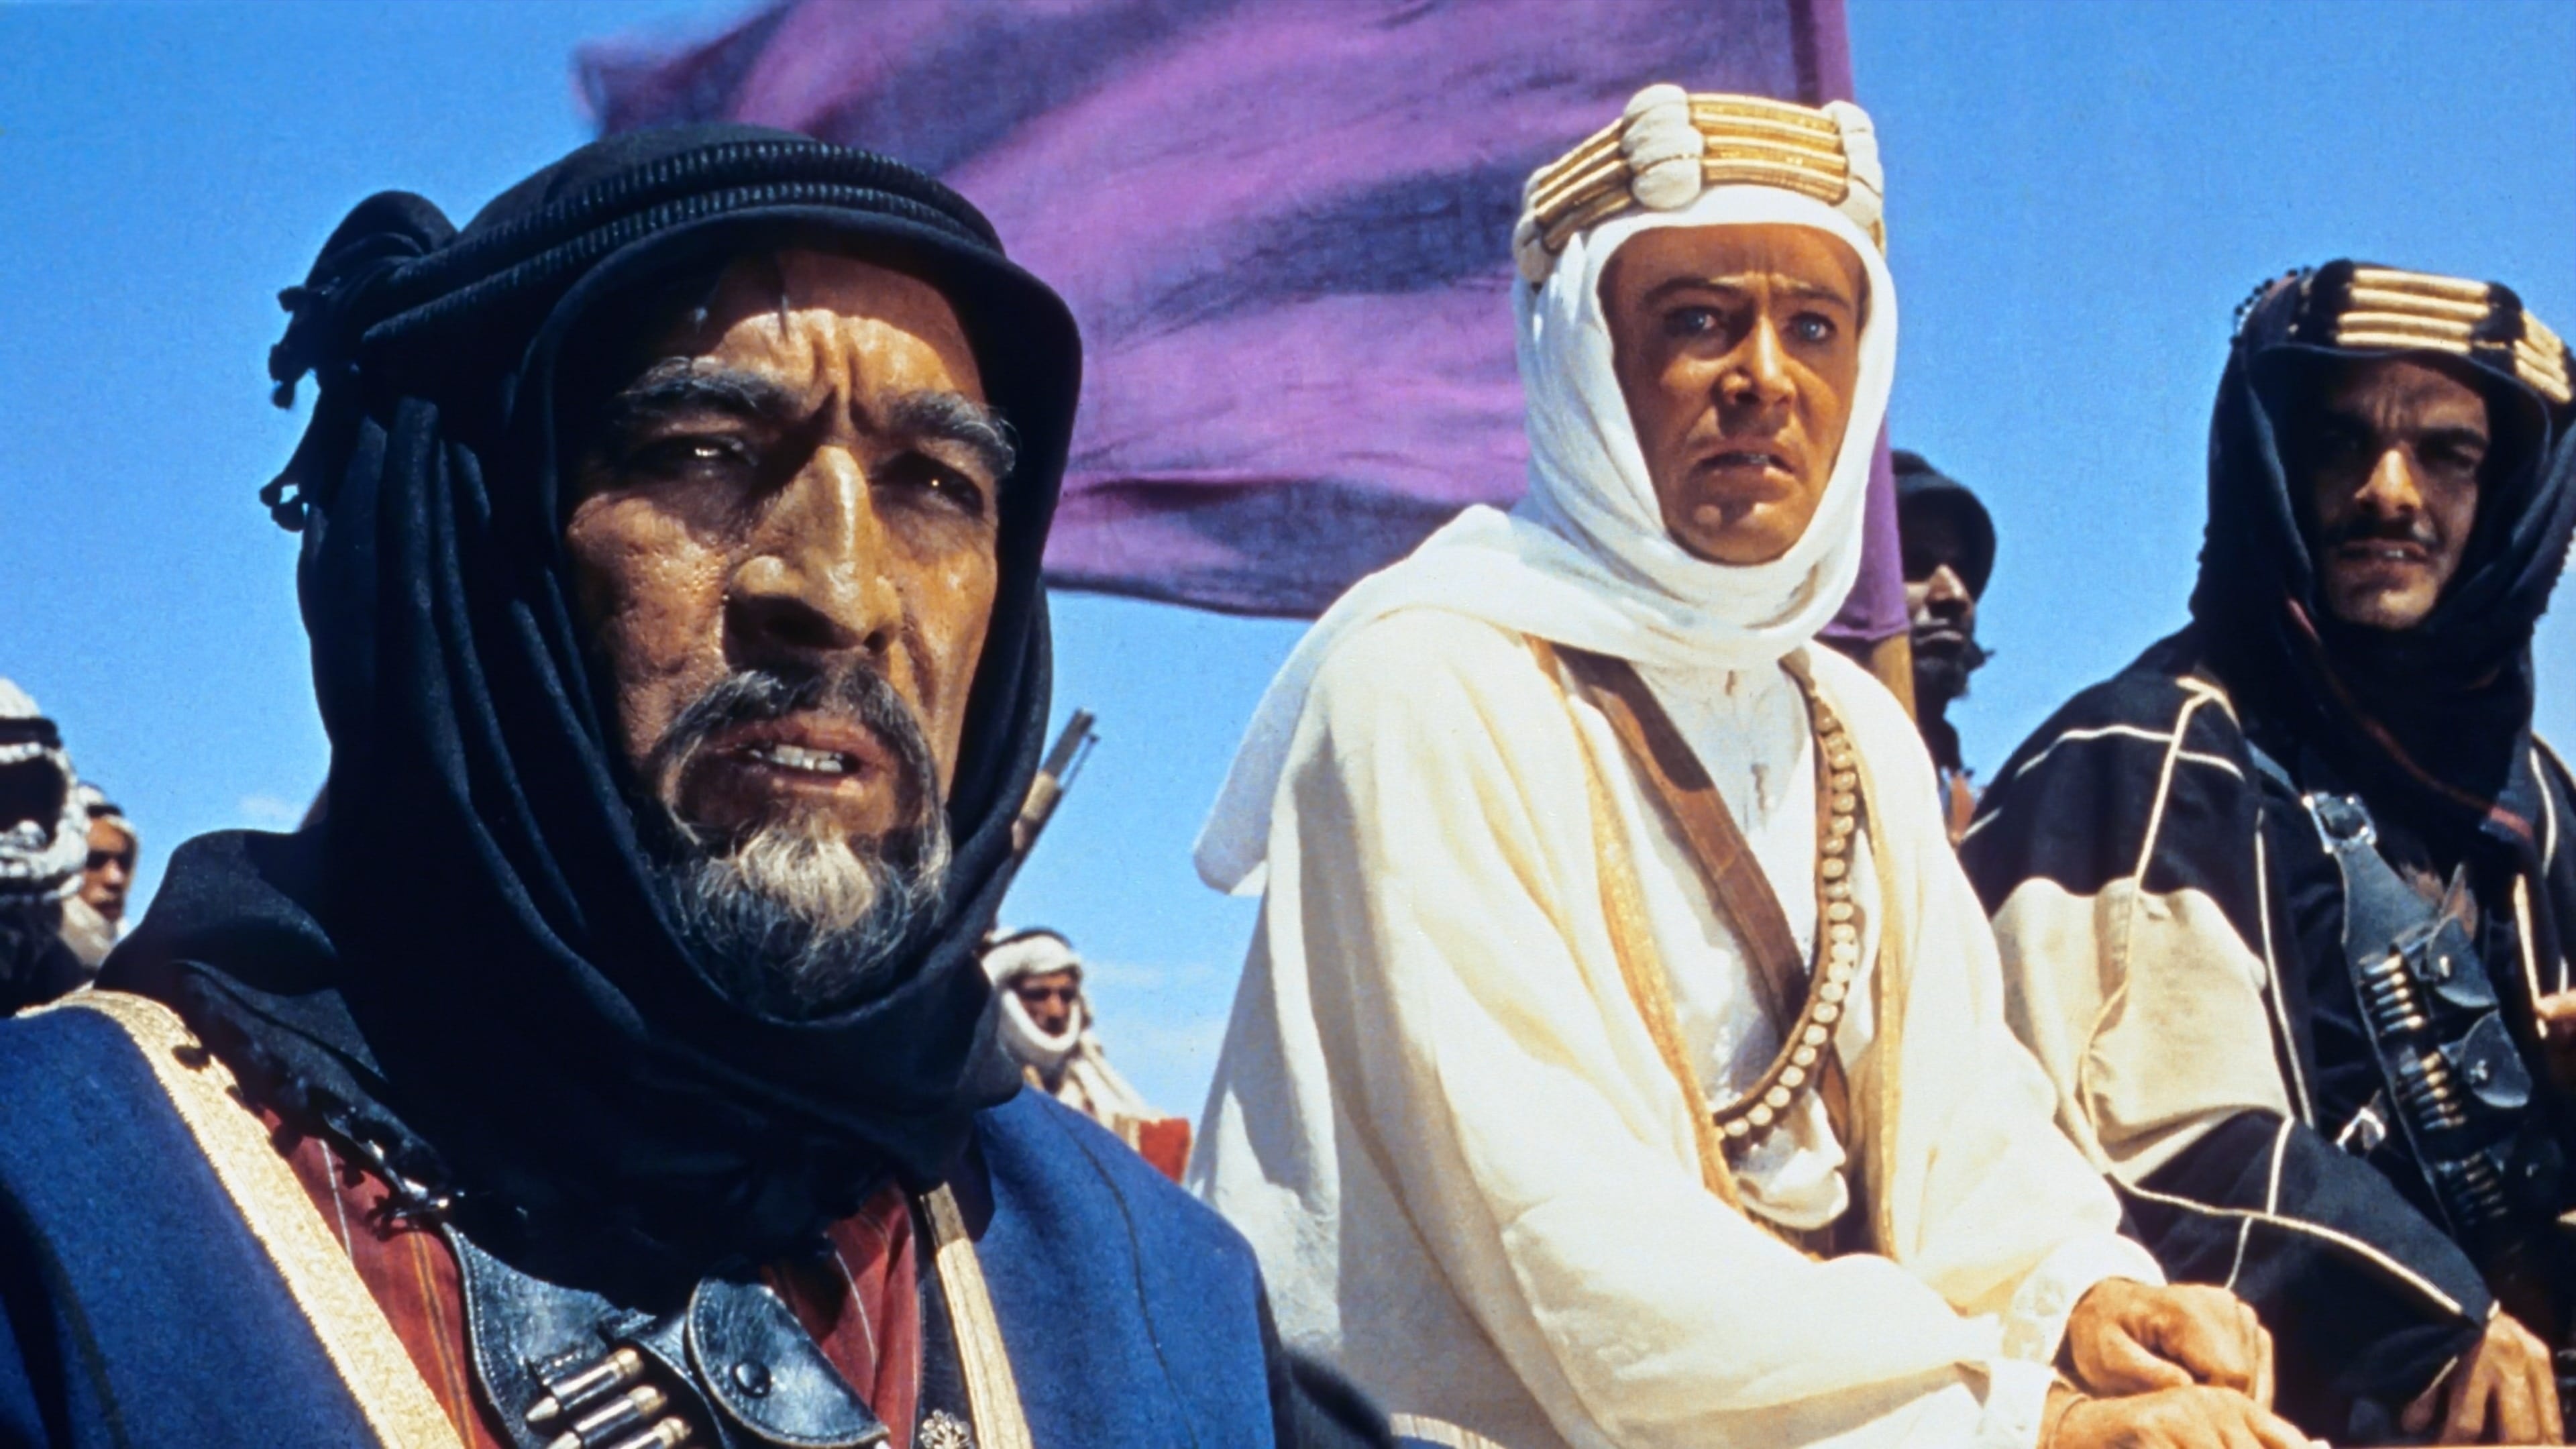 Lawrence of Arabia: A 1962 British epic historical drama film, Peter O'Toole. 3840x2160 4K Wallpaper.